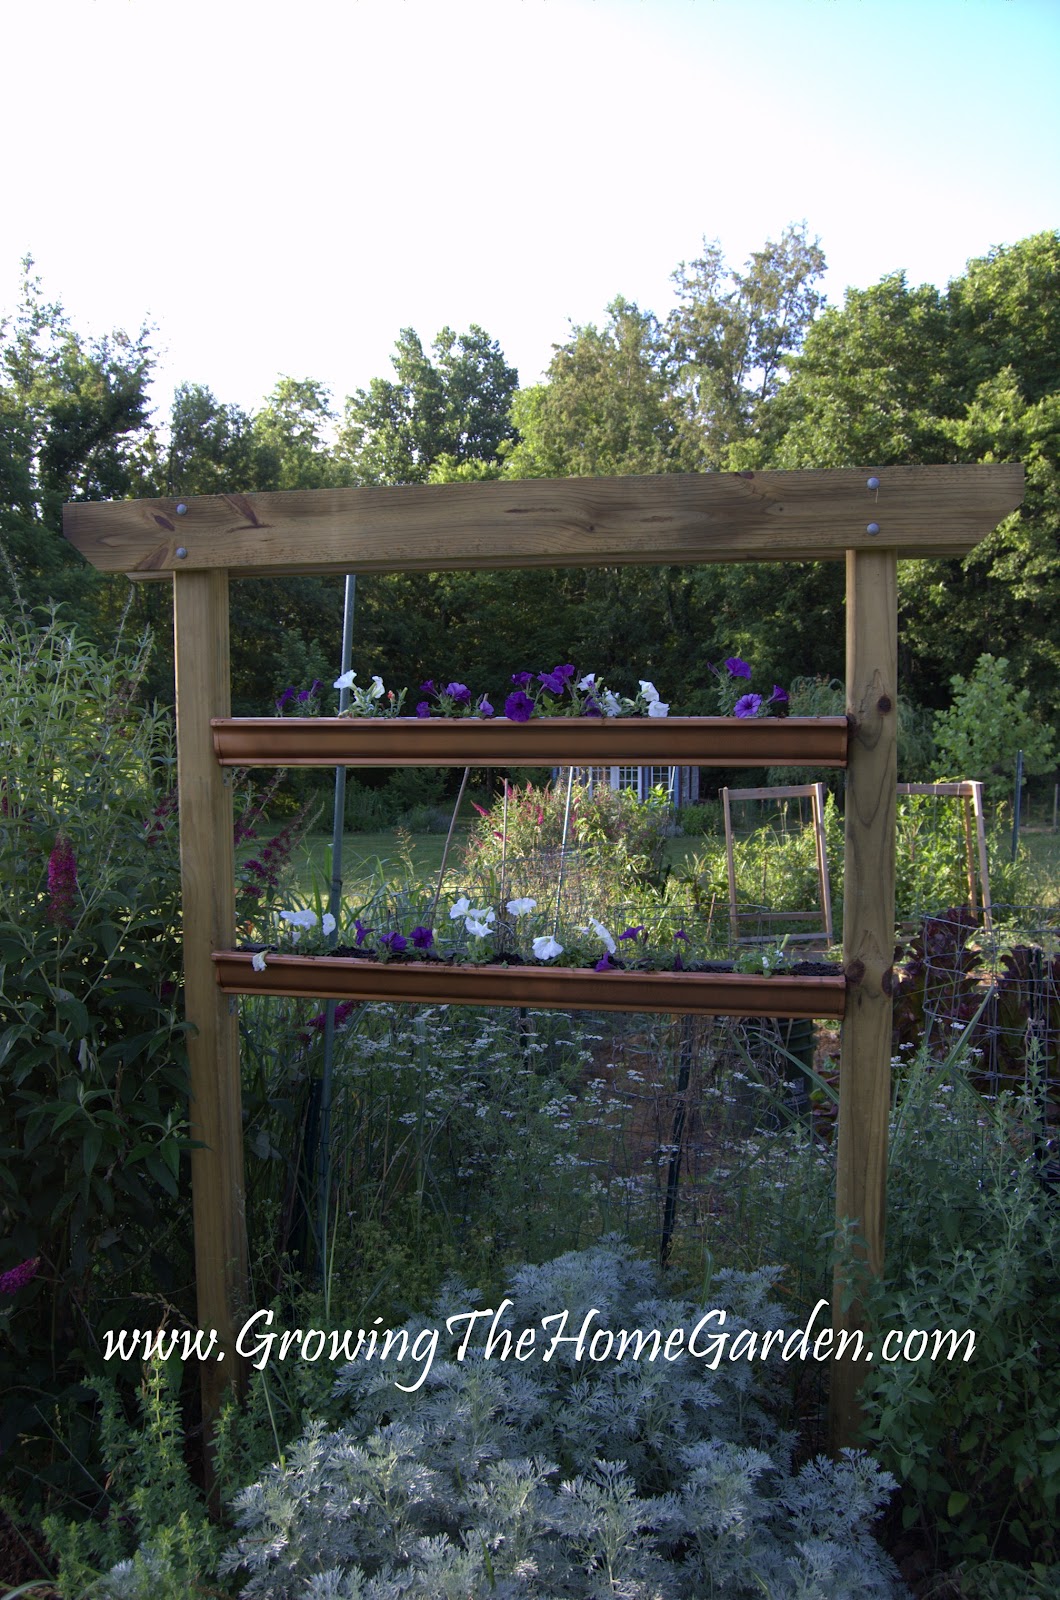 Growing The Home Garden: Gardening in the Home Landscape: May 2012